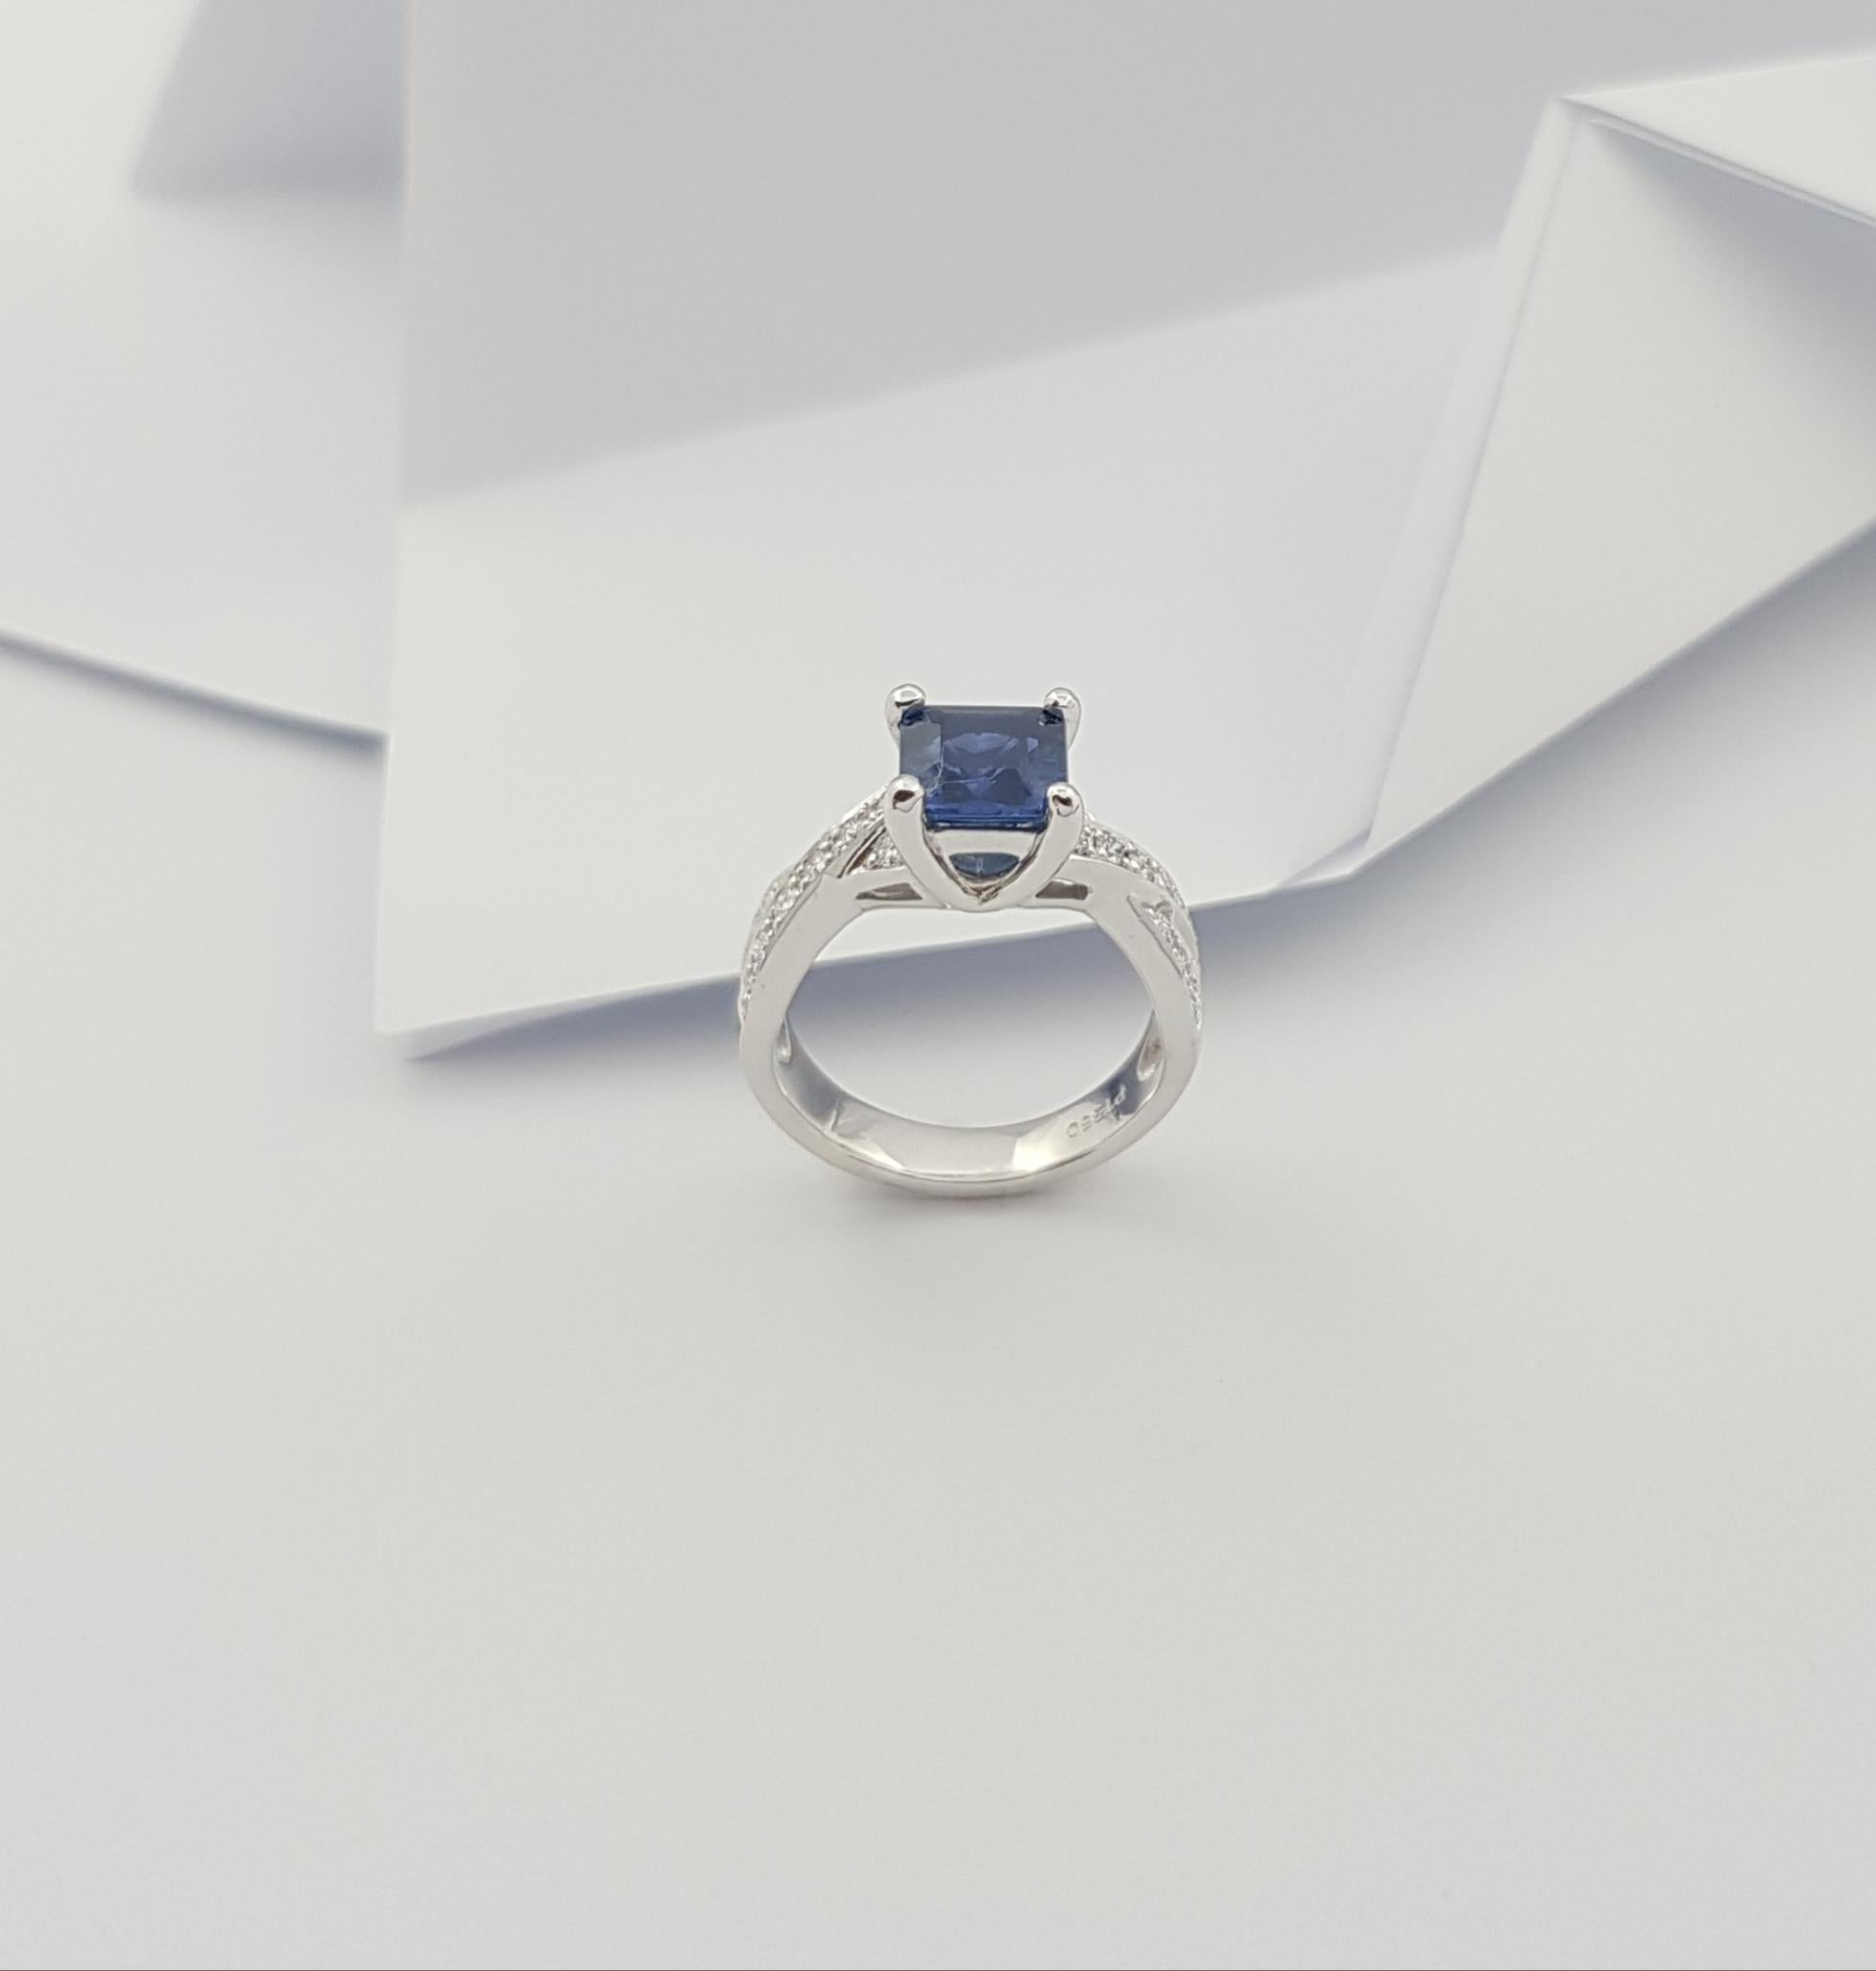 Certified Burmese Blue Sapphire with Diamond Ring Set in Platinum 950  For Sale 2